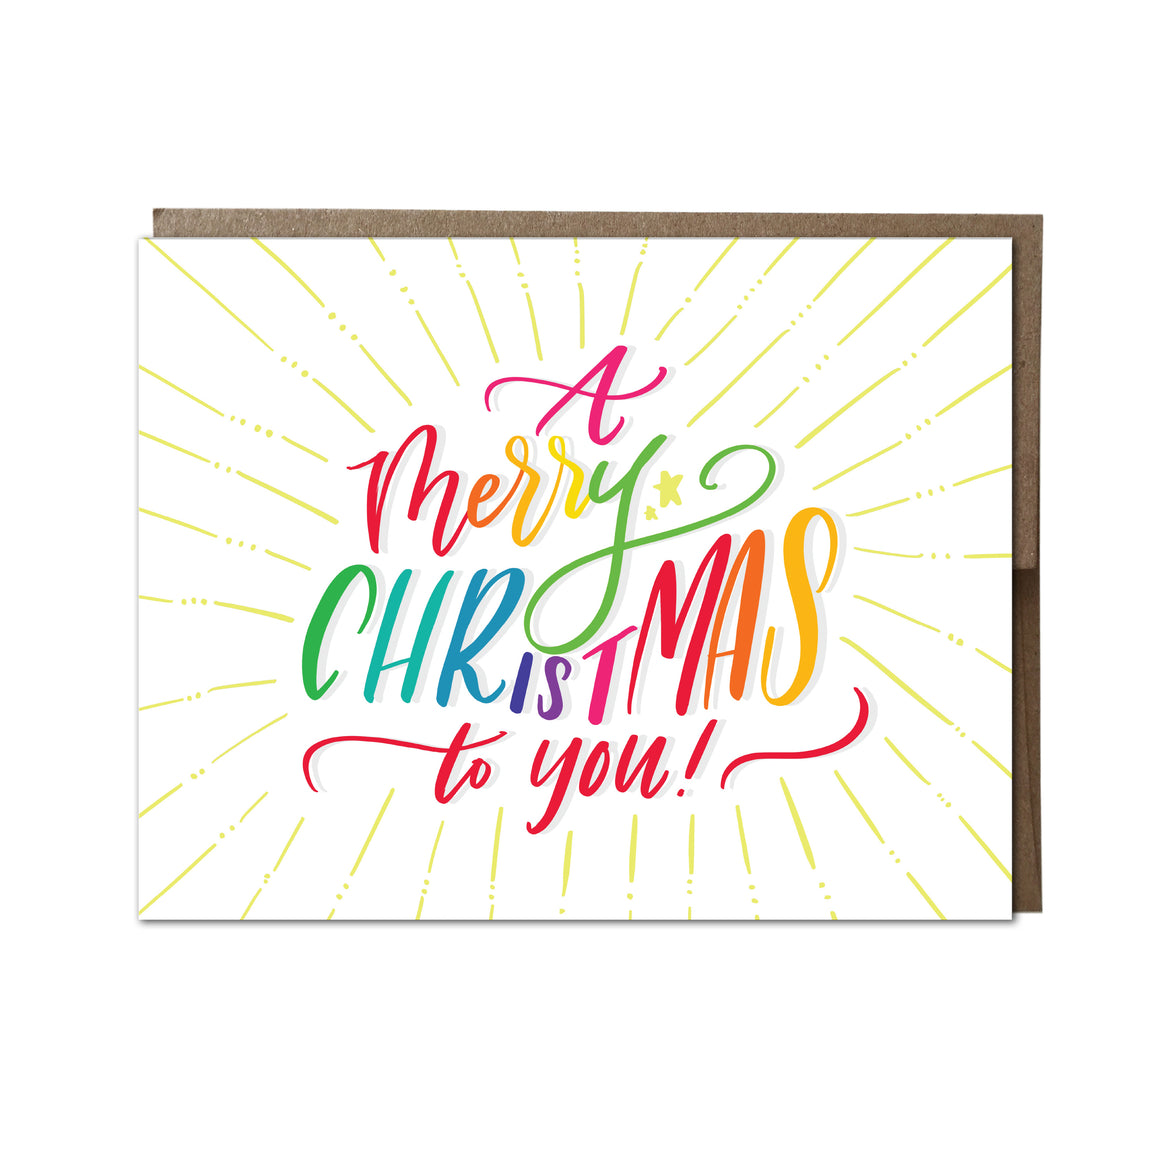 "A Merry Christmas To You" card